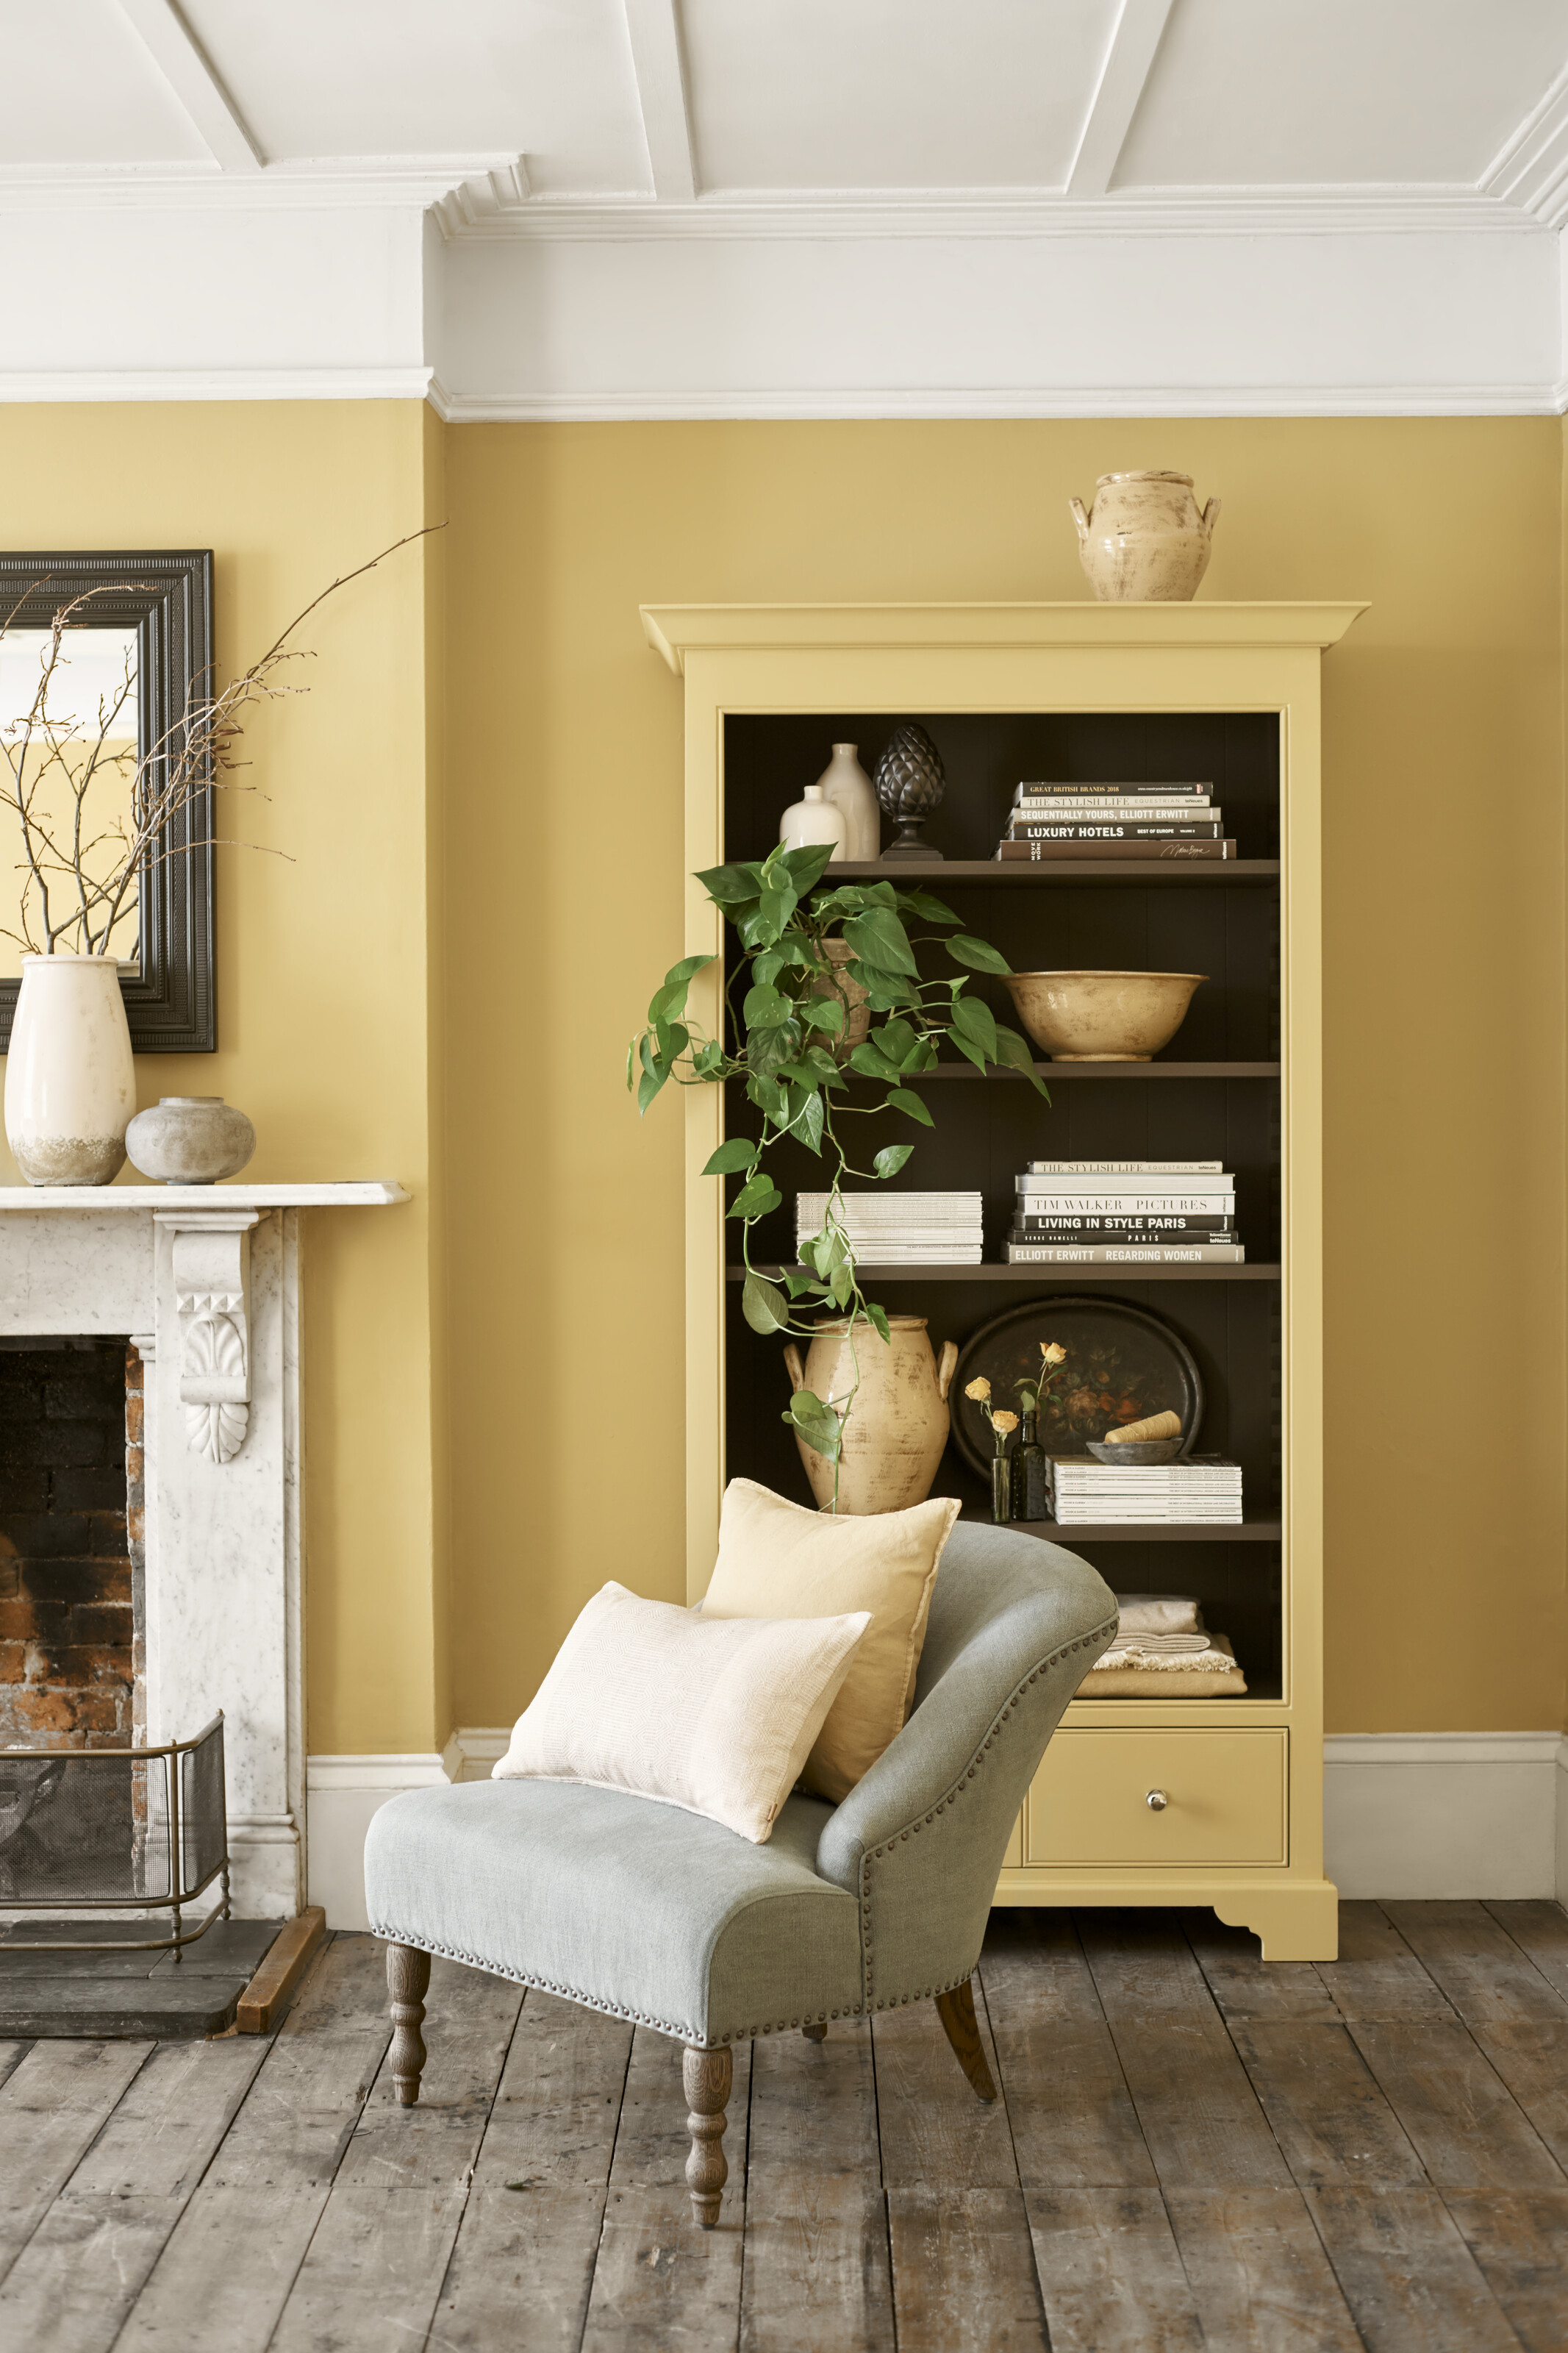 Living room alcove ideas: 10 stylish looks for nooks or niches | Homes ...